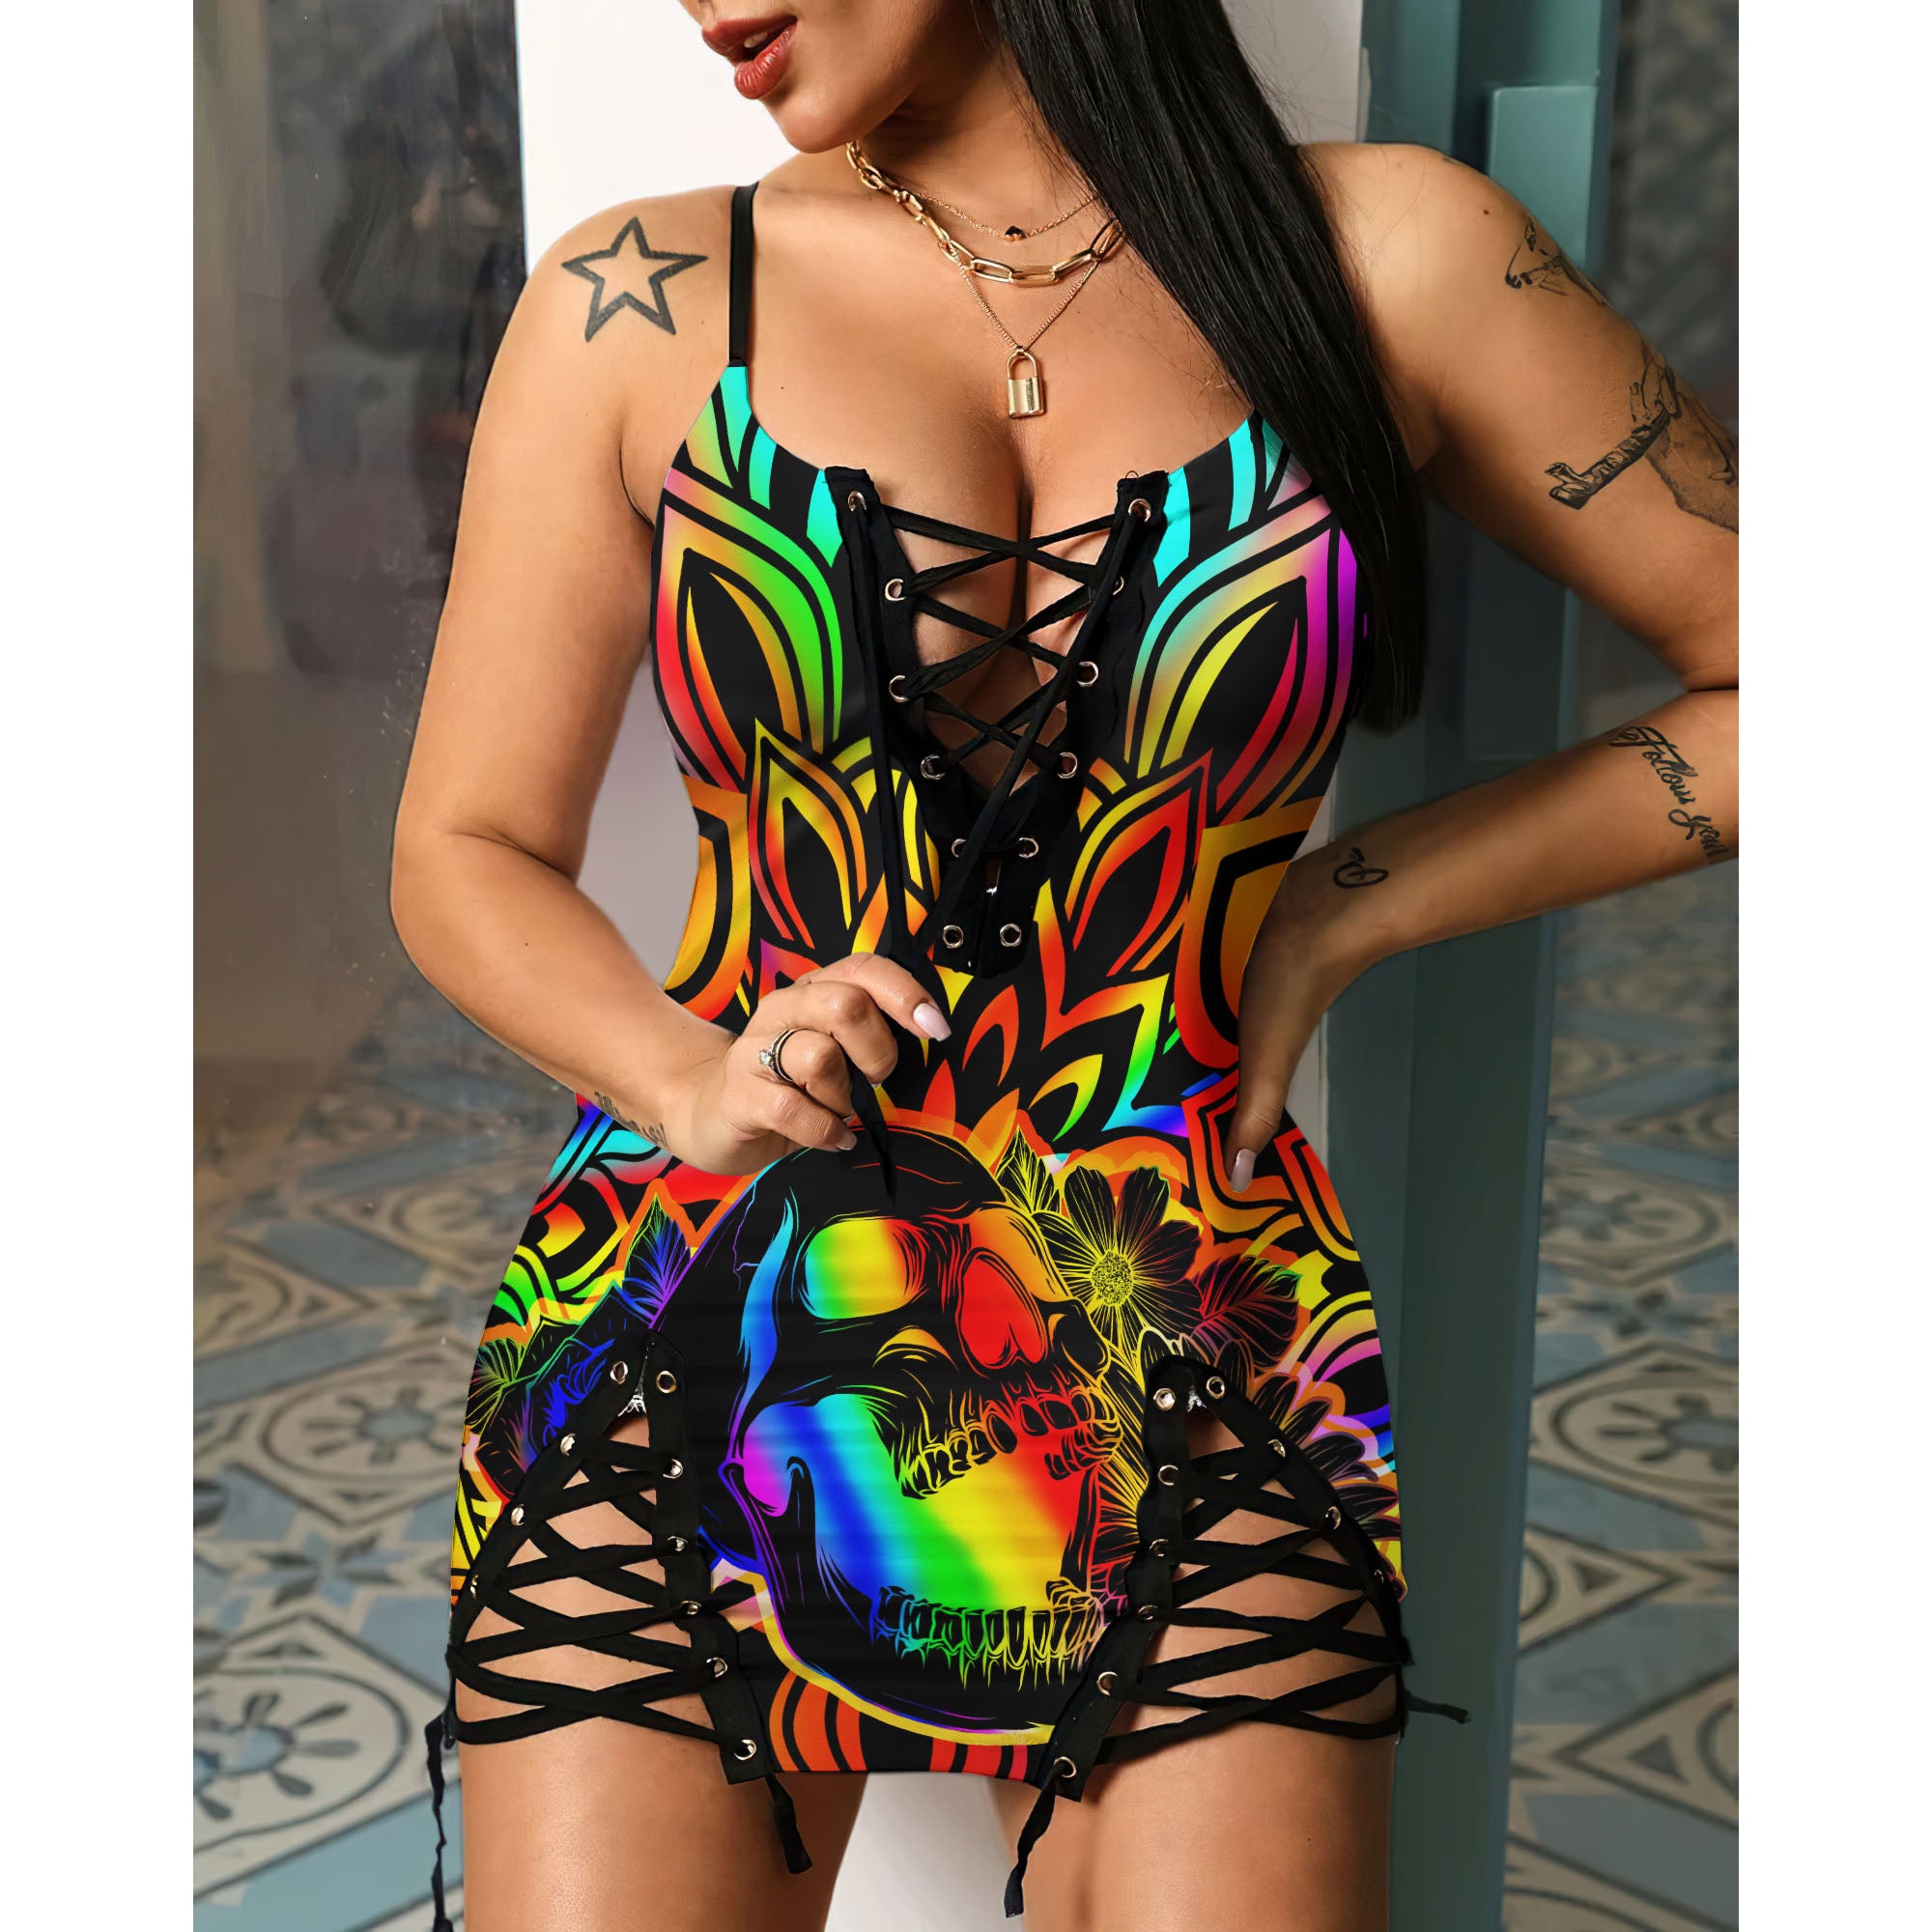 Express your personal style with the Hot Gothic Dress, a timeless piece featuring a unique Colorful Skull Mandala, perfect for enhancing your daily fashion routine.